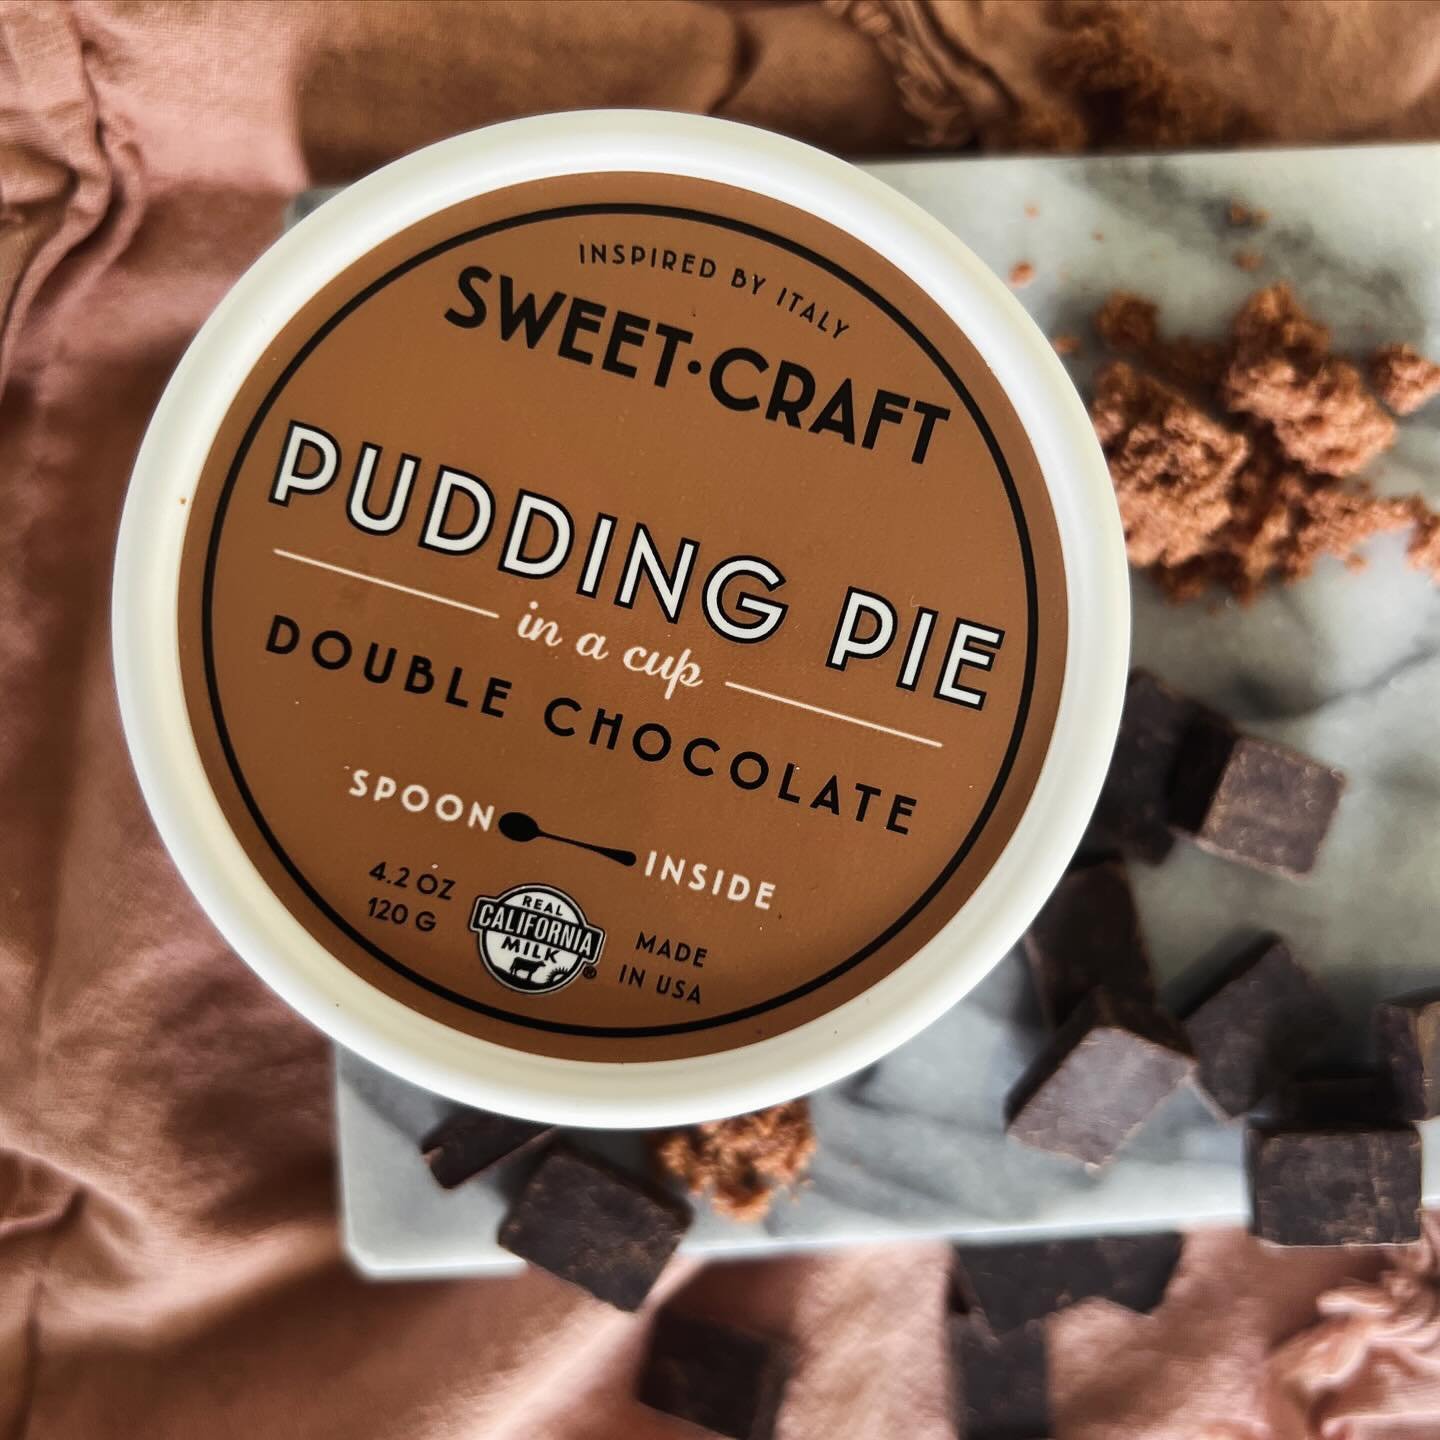 Double Chocolate, Double Delicious 🍫🍫 Our Double Chocolate Pudding Pie brings you luxurious chocolate pudding atop a chocolate graham cracker crust 🏆

#SweetCraftDolceria #PuddingPie #Chocolate